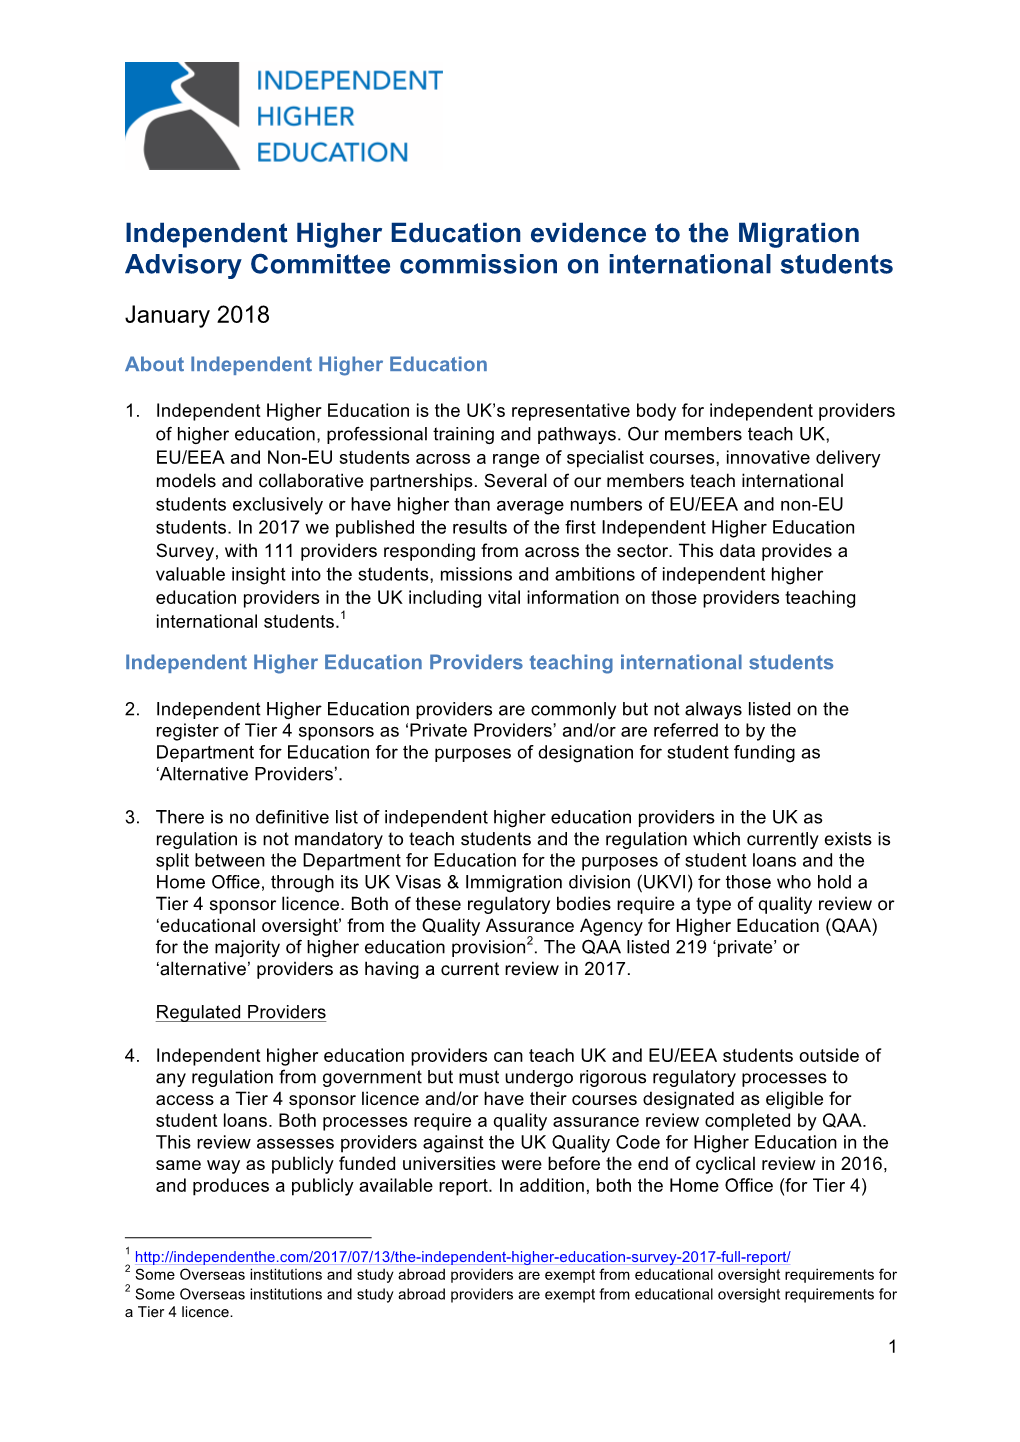 Independent Higher Education Evidence to the Migration Advisory Committee Commission on International Students